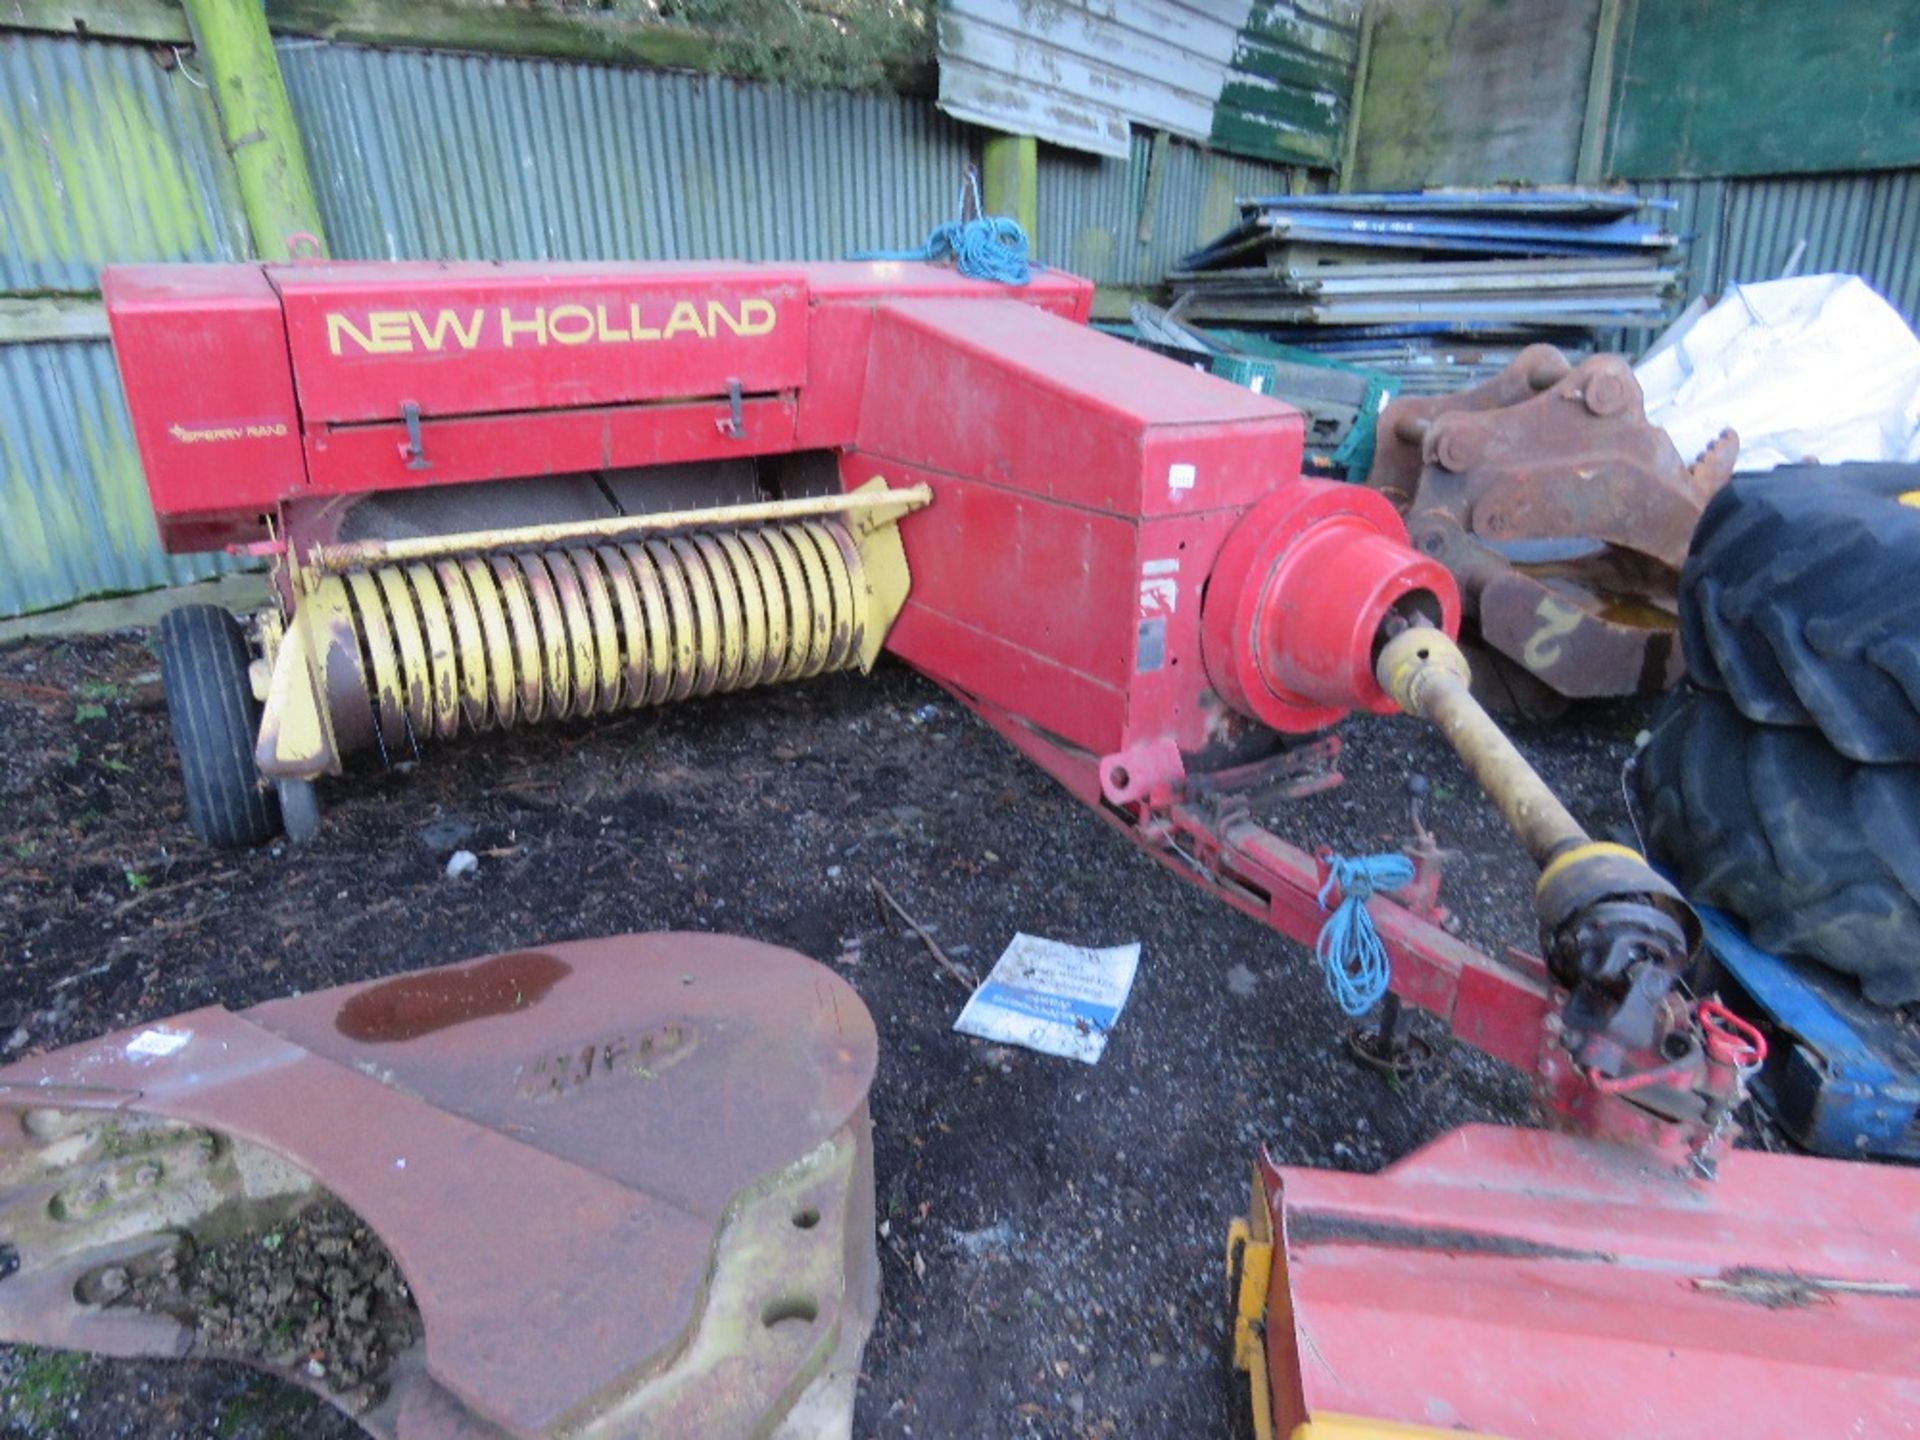 NEW HOLLAND SUPER HAYLINER 276 CONVENTIONAL BALER. ALSO COMES WITH A FLAT 8 BALE SLEDGE INCLUDED IF